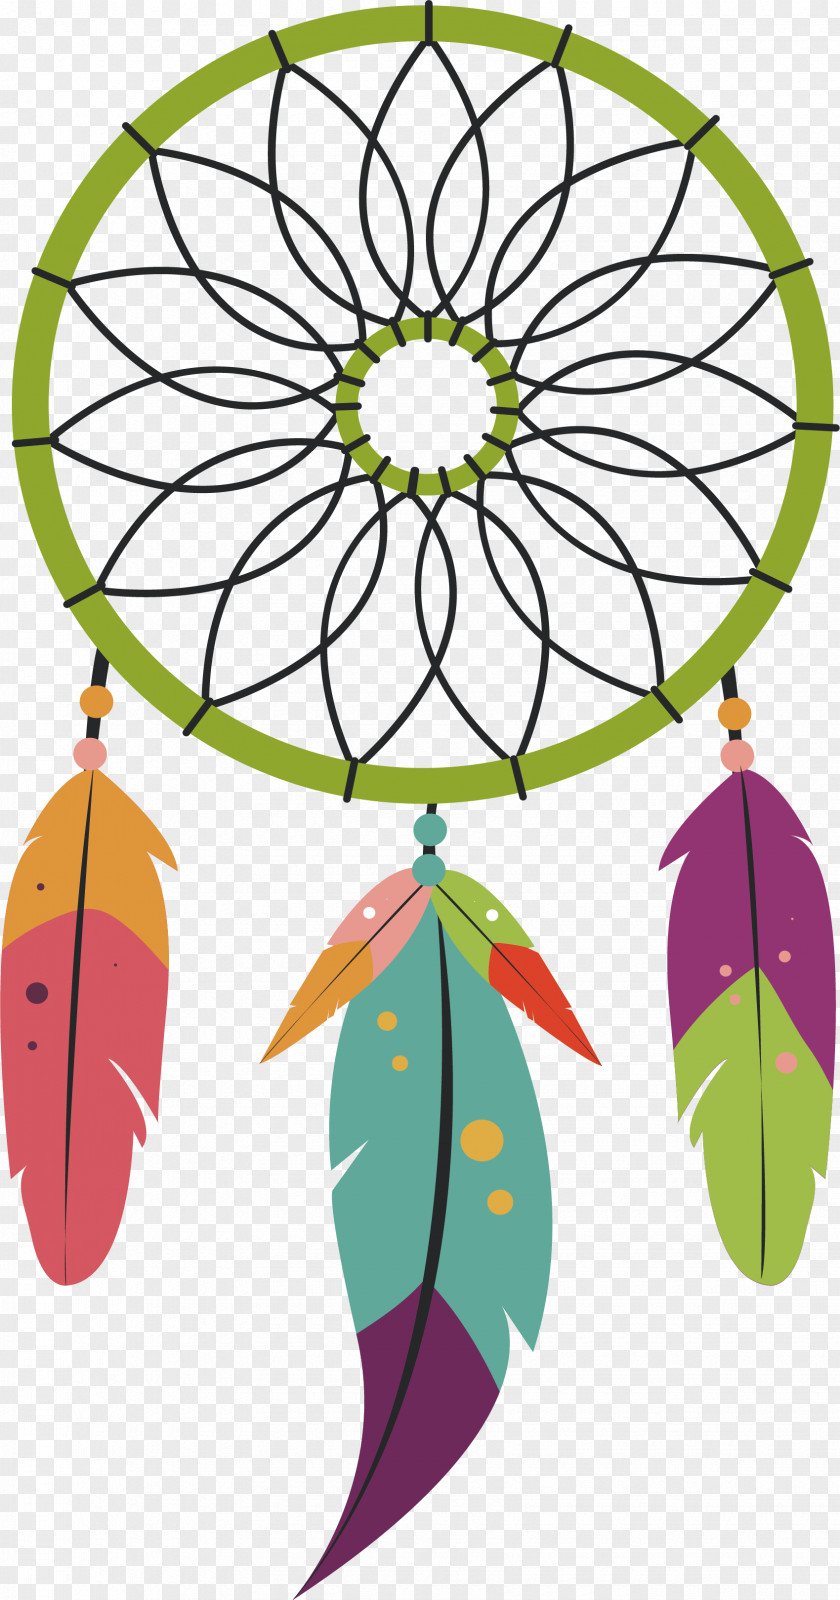 Colored Feather National Wind Ornament Indian Independence Day Public Holiday August 15 PNG